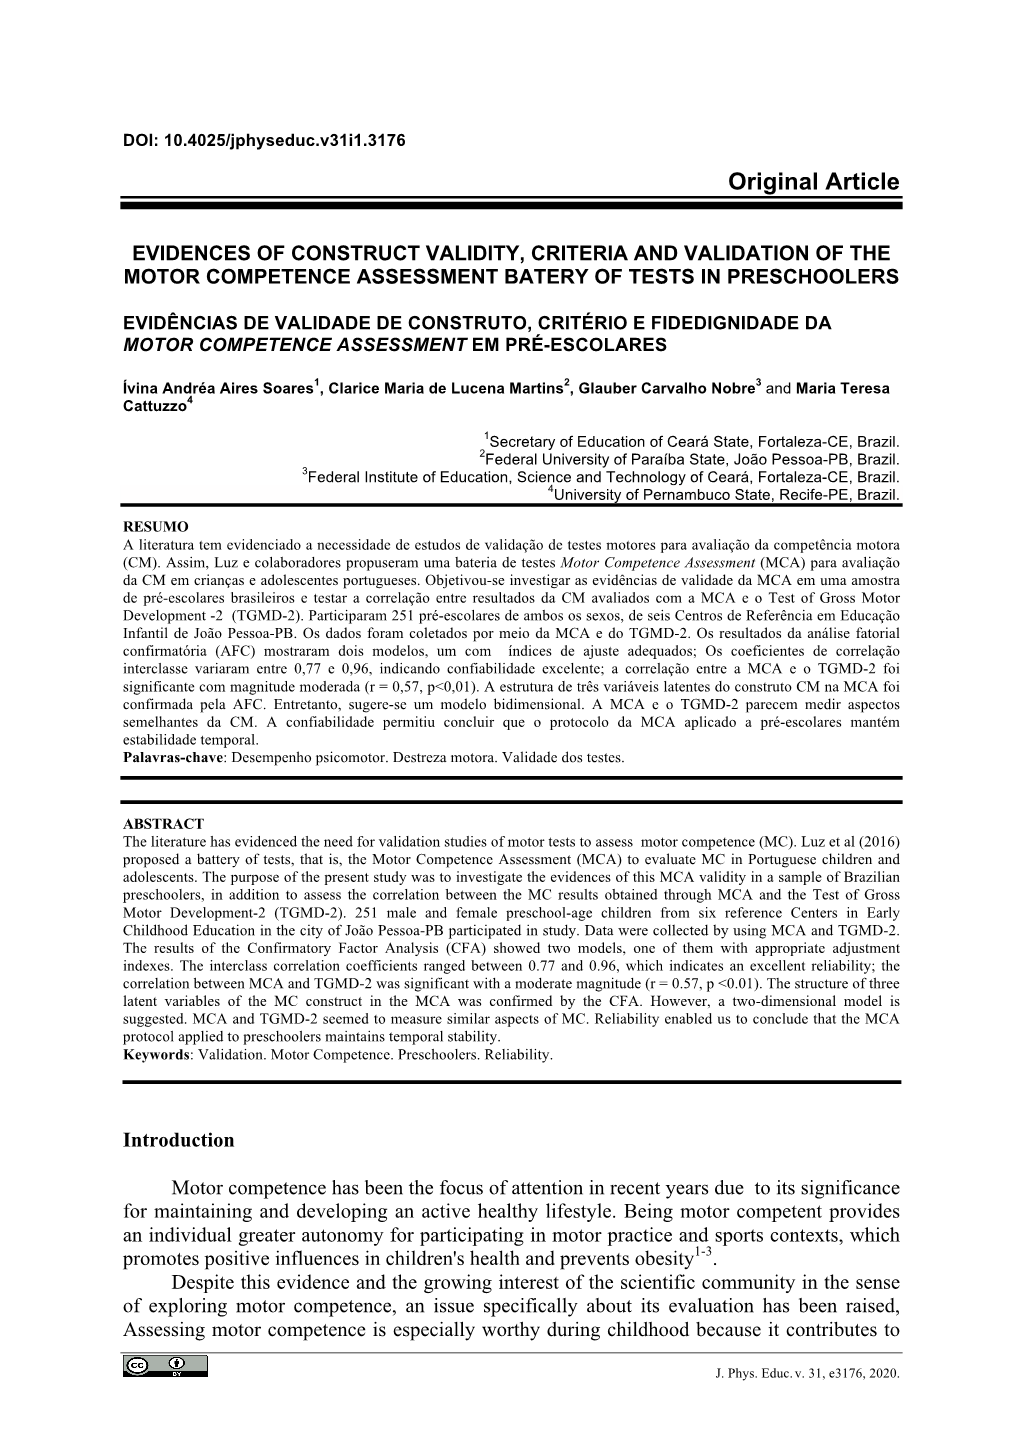 Evidences of Construct Validity, Criteria and Validation of the Motor Competence Assessment Batery of Tests in Preschoolers